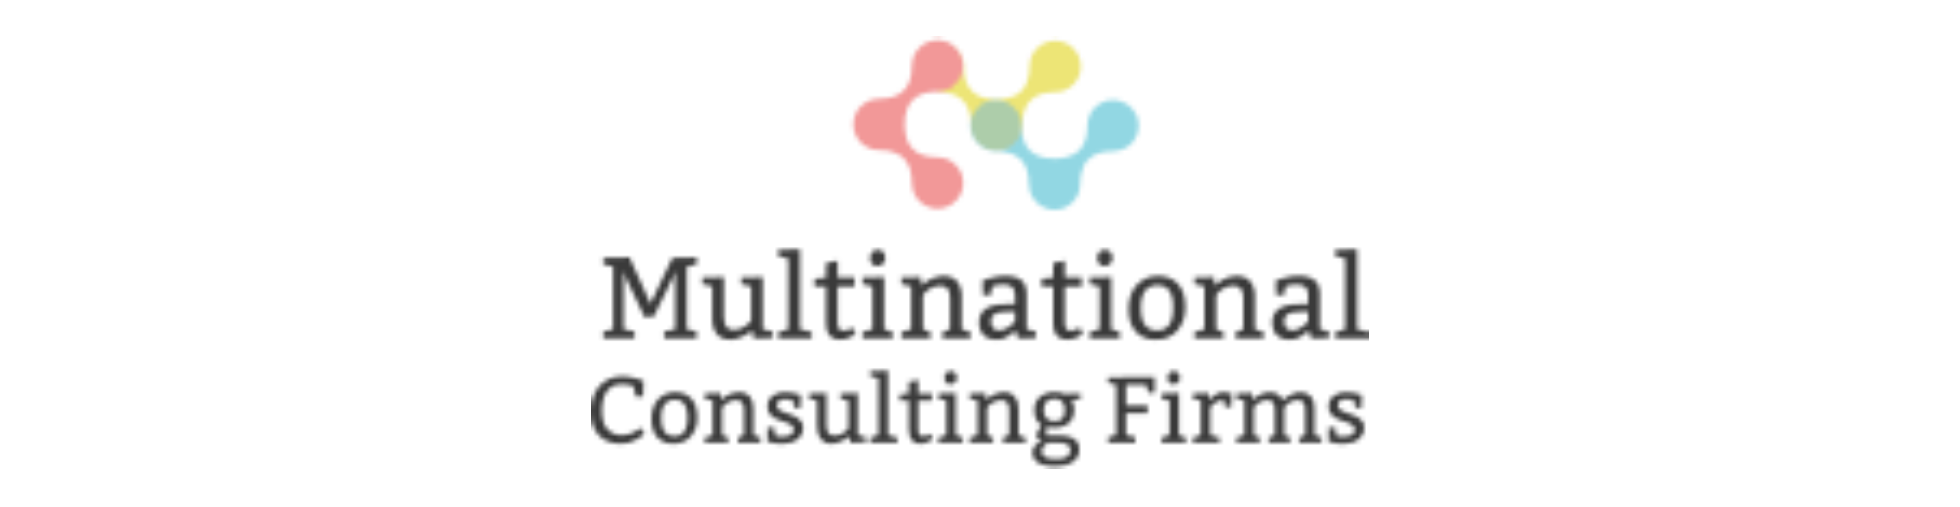 Multinational Consulting Firms